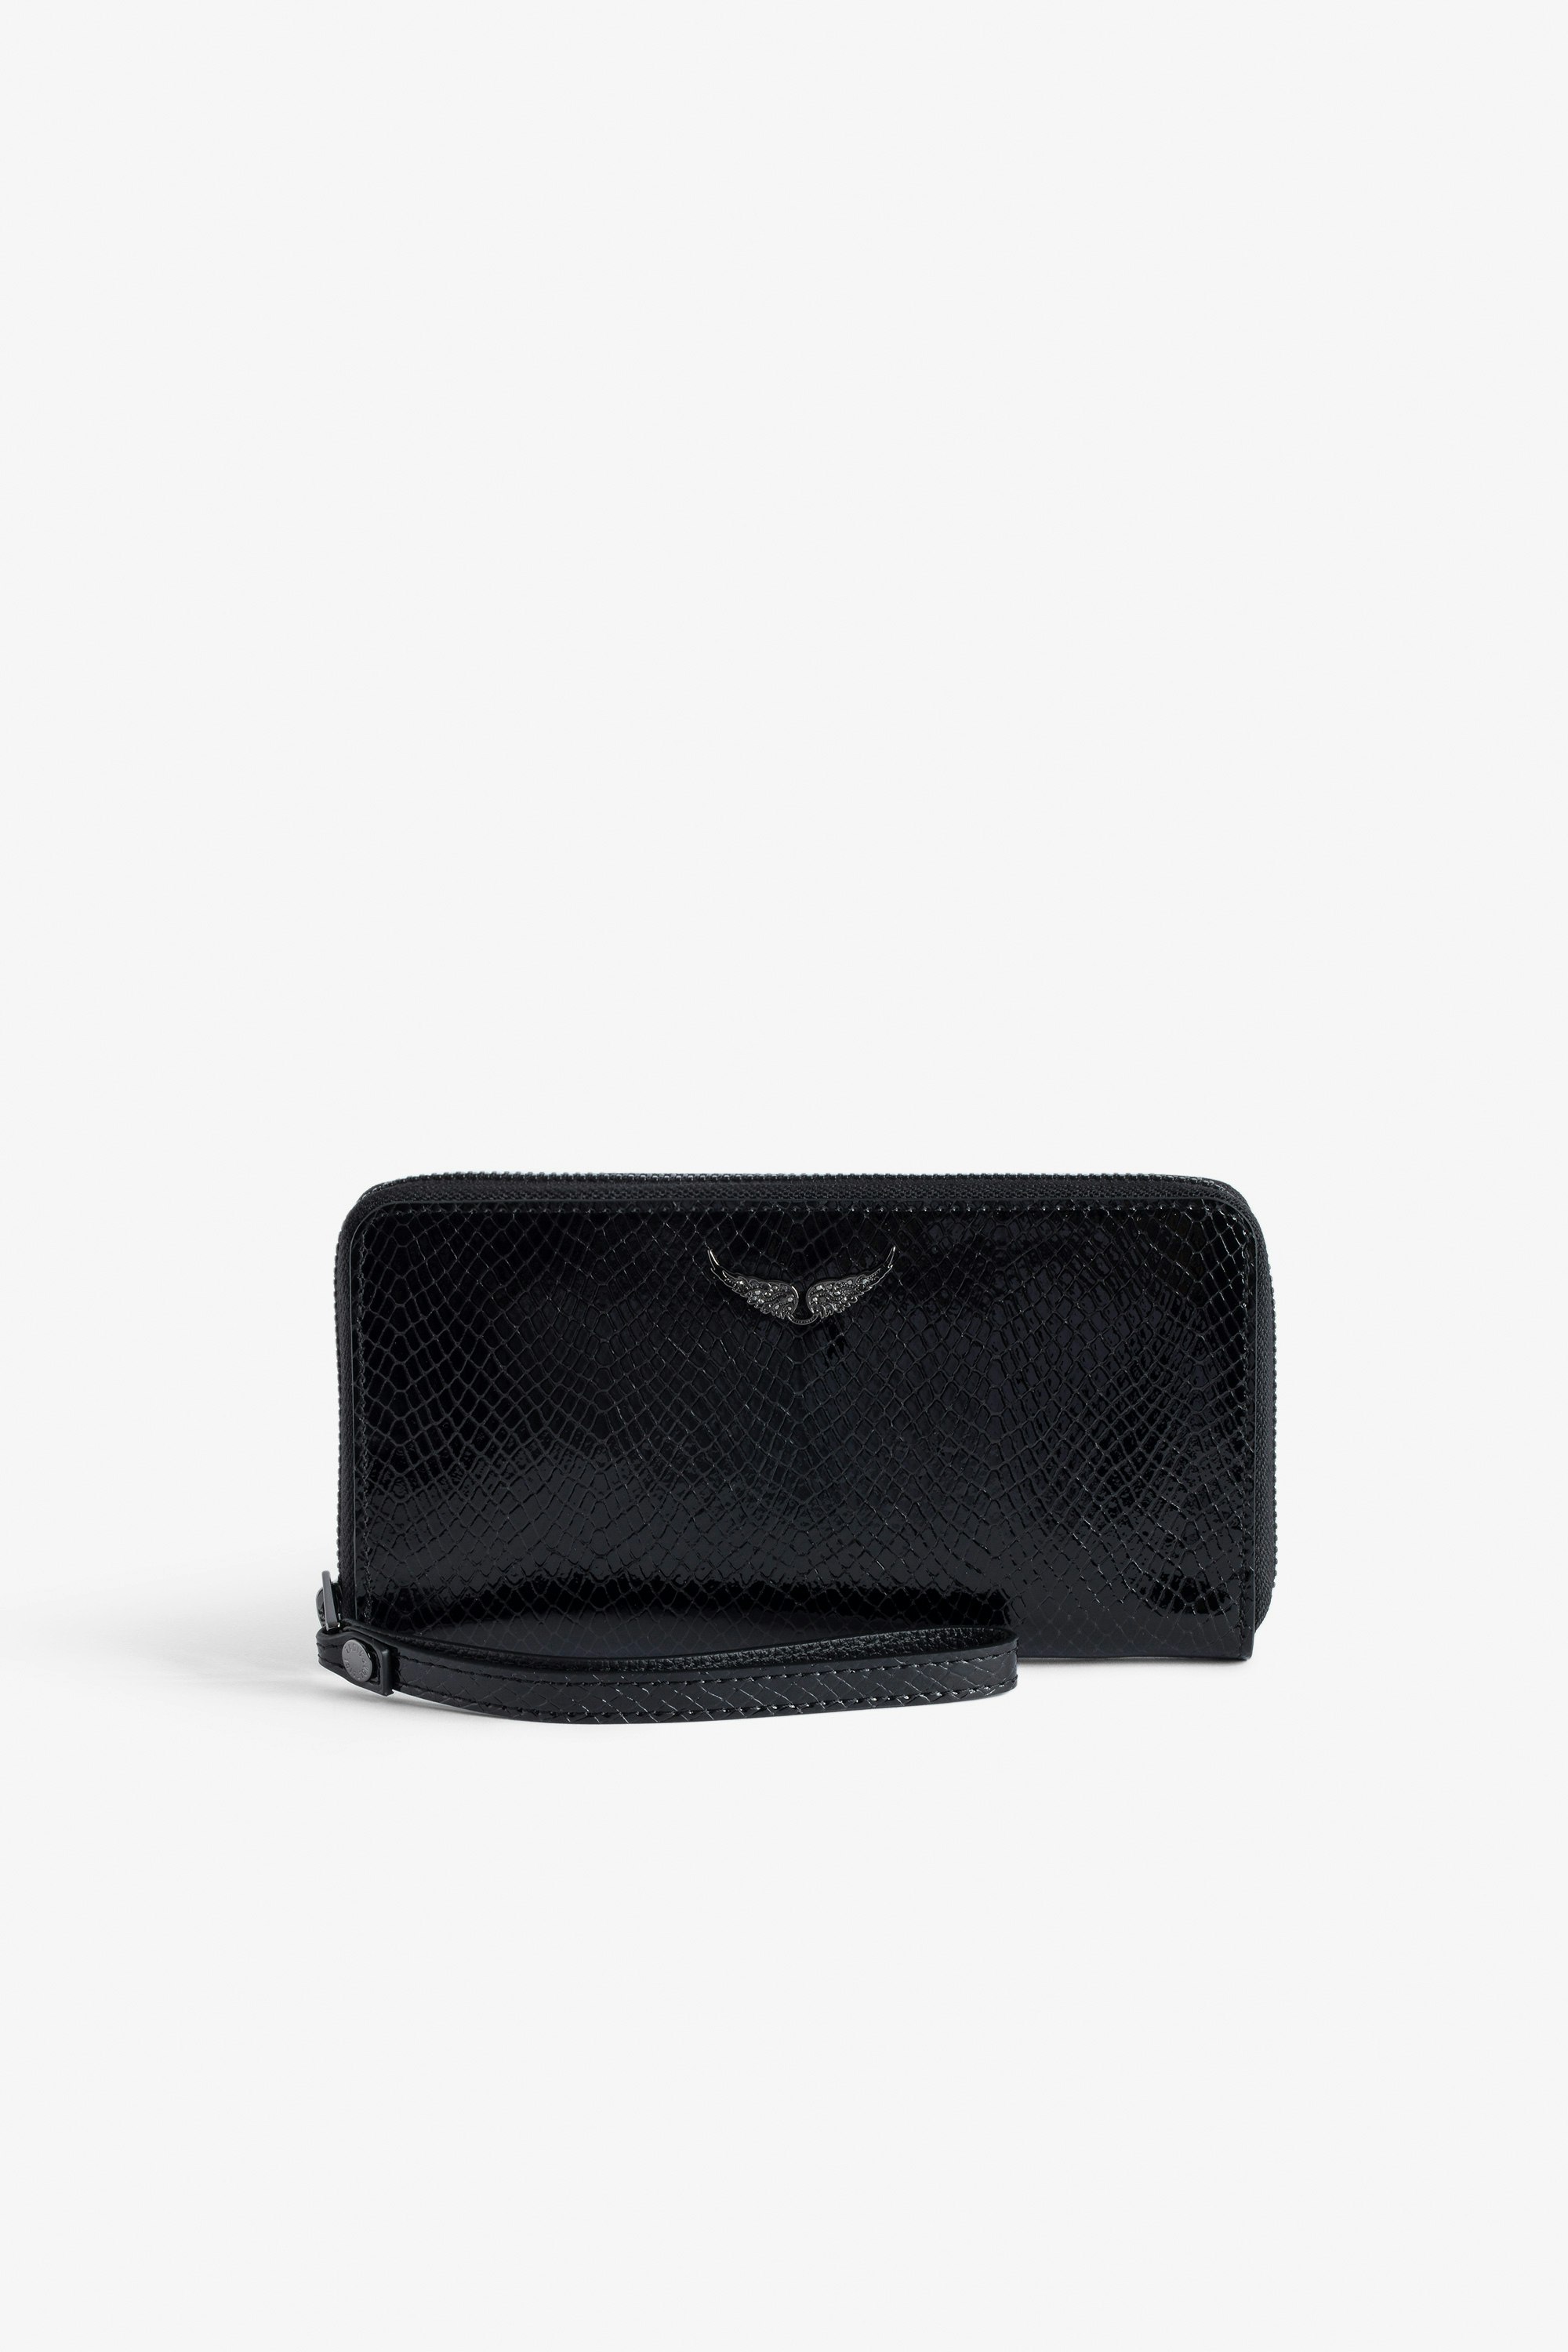 Compagnon Glossy Wild Embossed Wallet - Women’s black python-effect patent leather wallet with wings charm.